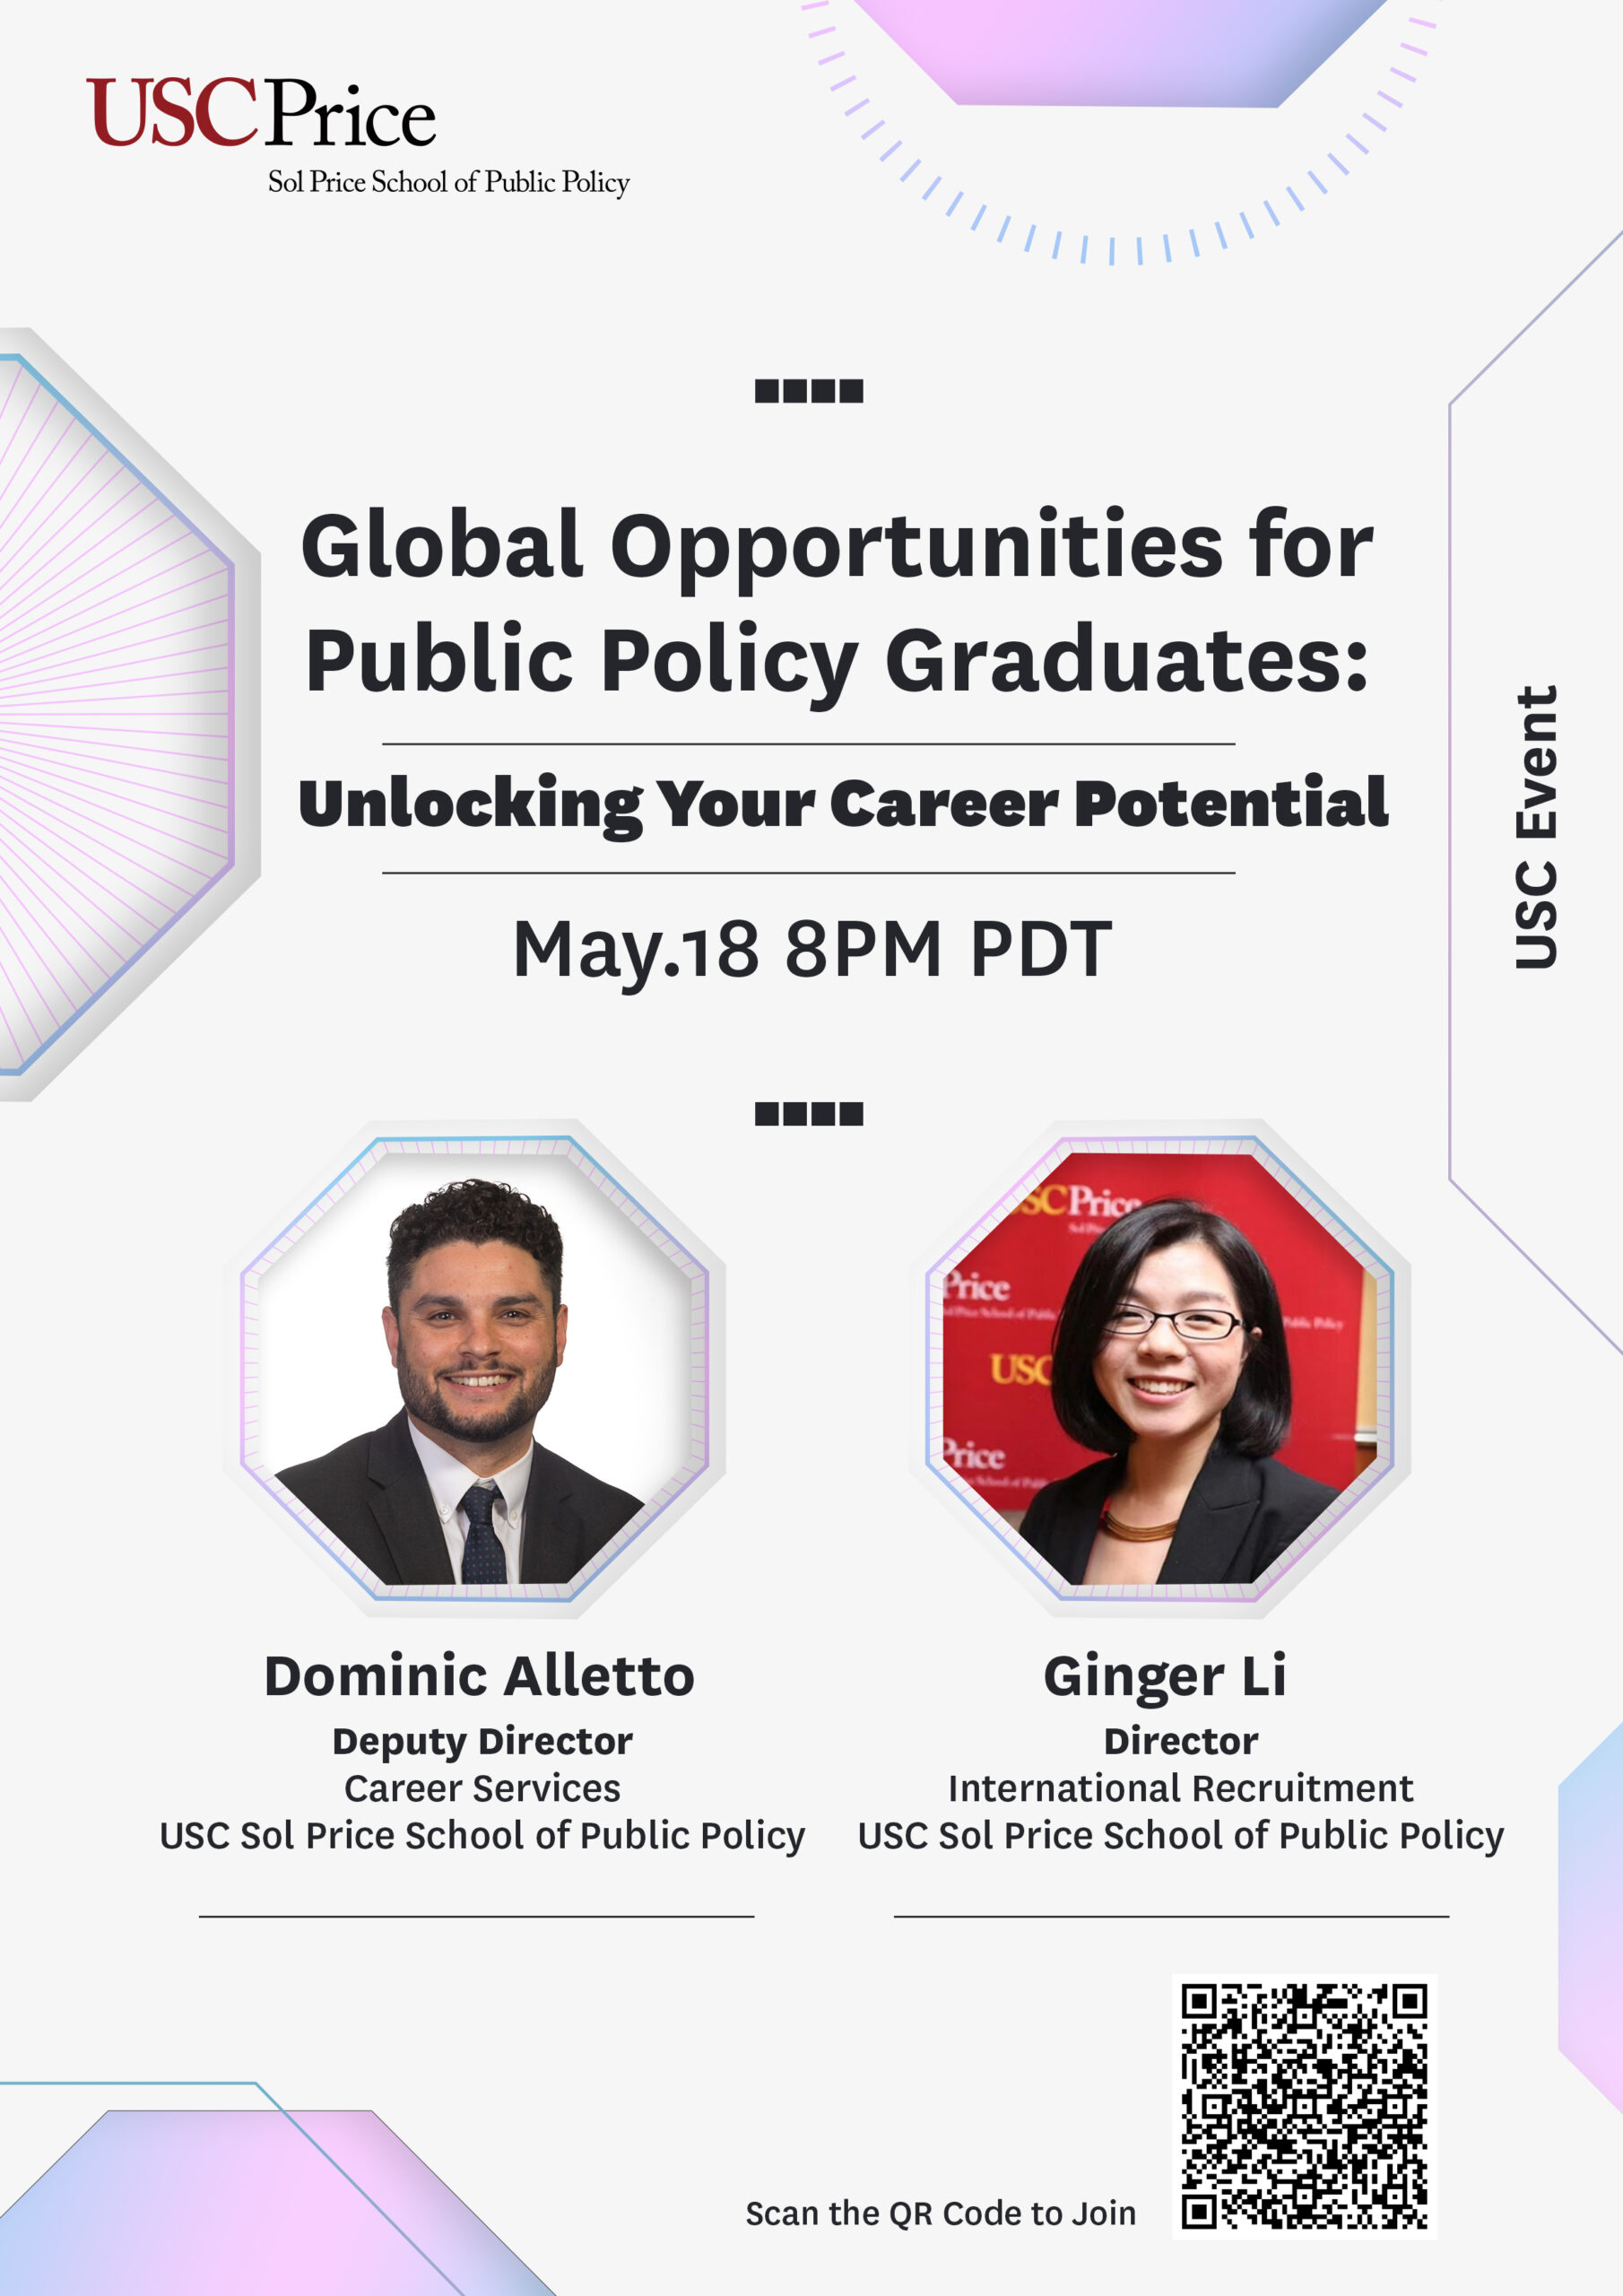 Global Opportunities for Public Policy Graduates: Unlocking Your Career Potential